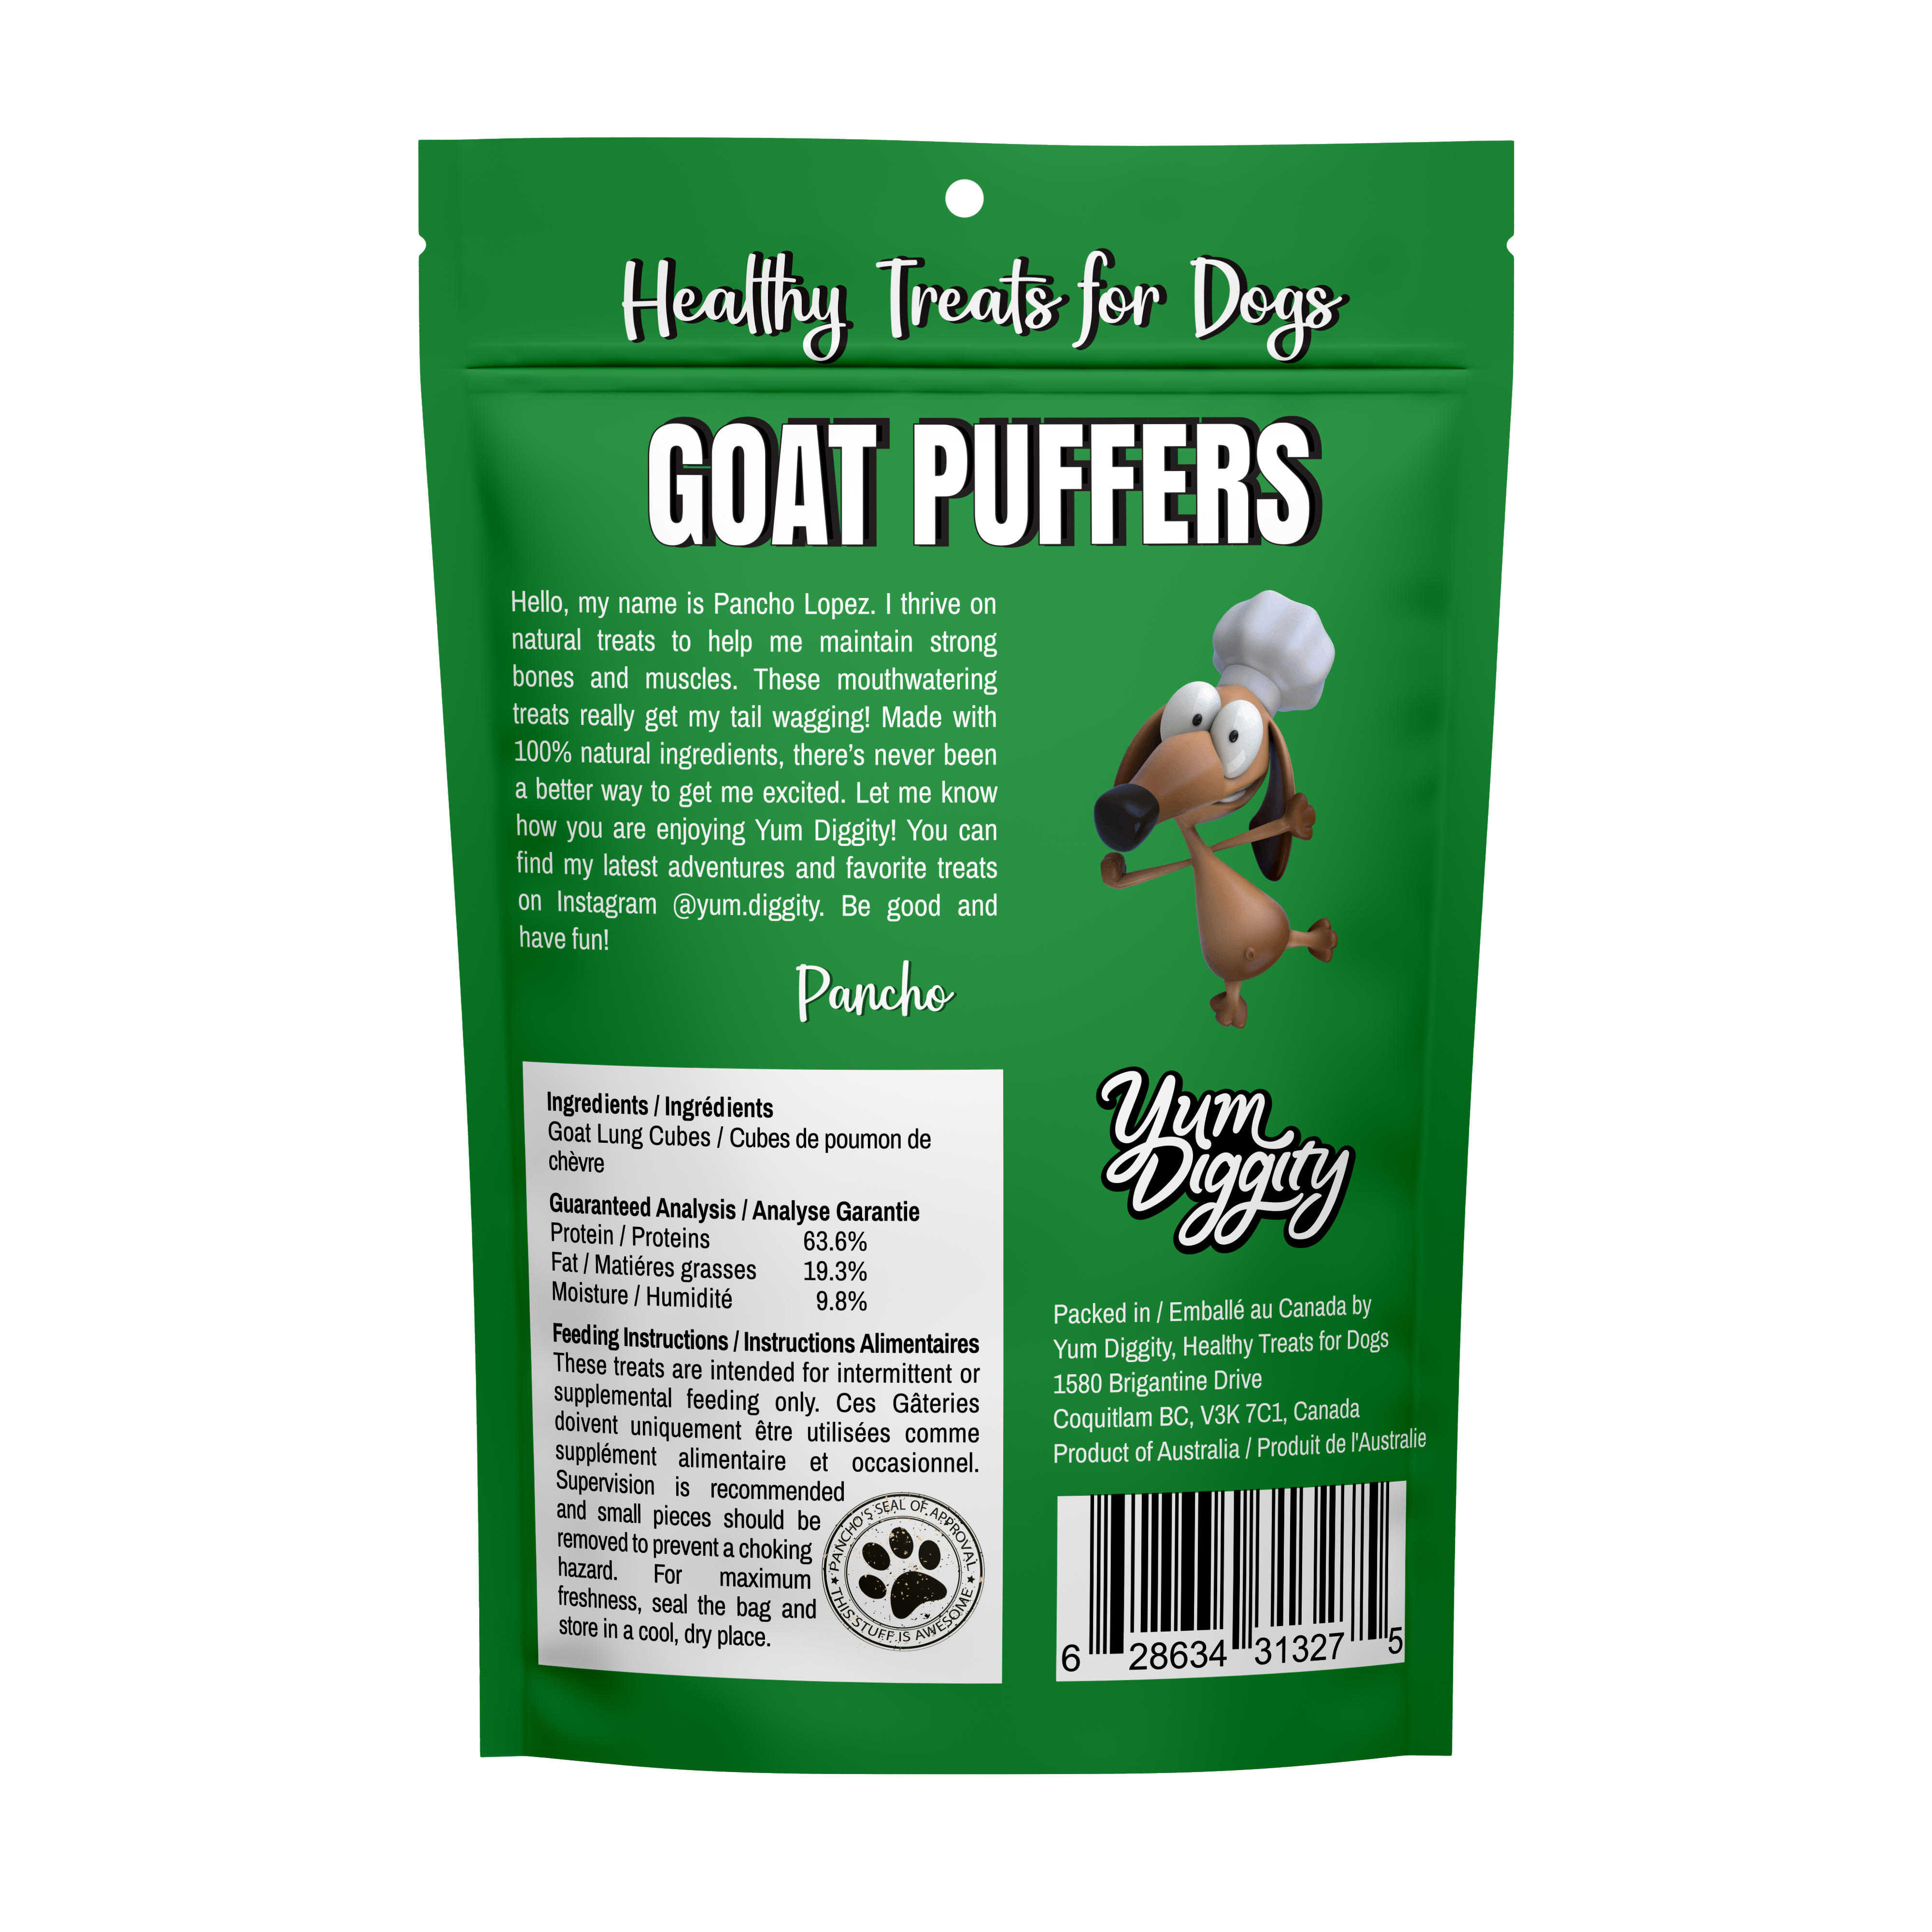 Yum Diggity - Goat "Puffers" Lung Cubes